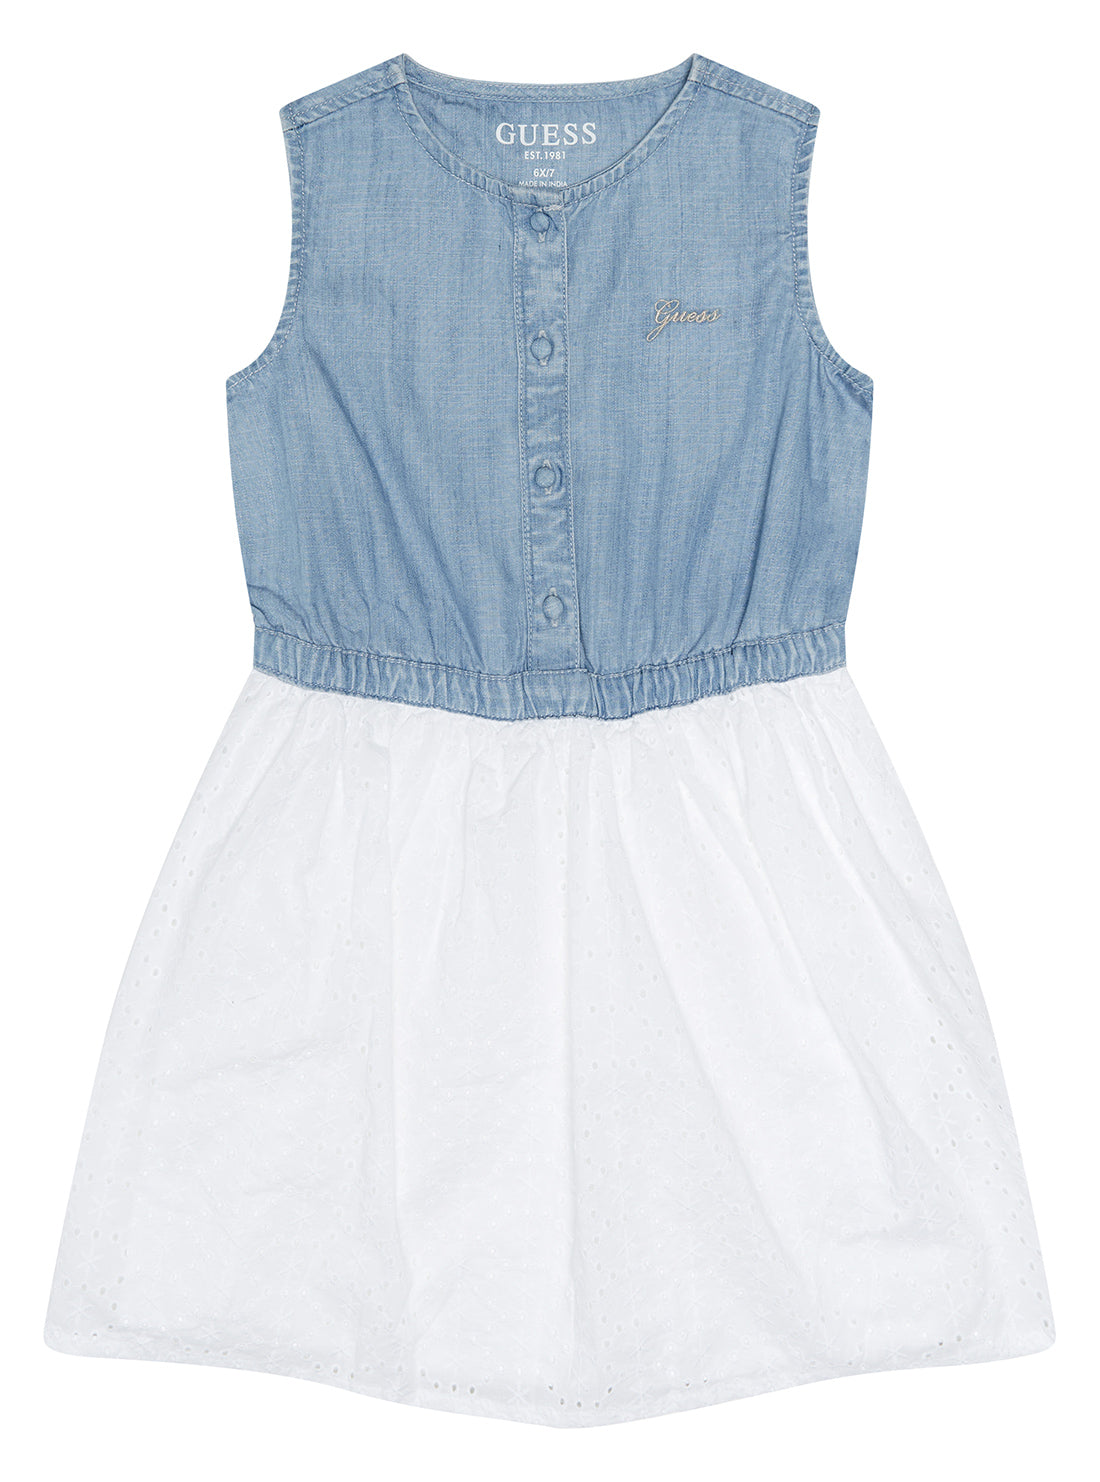 Girl's Blue Denim and White Sleeveless Dress (2-7) | GUESS Kids | Front view